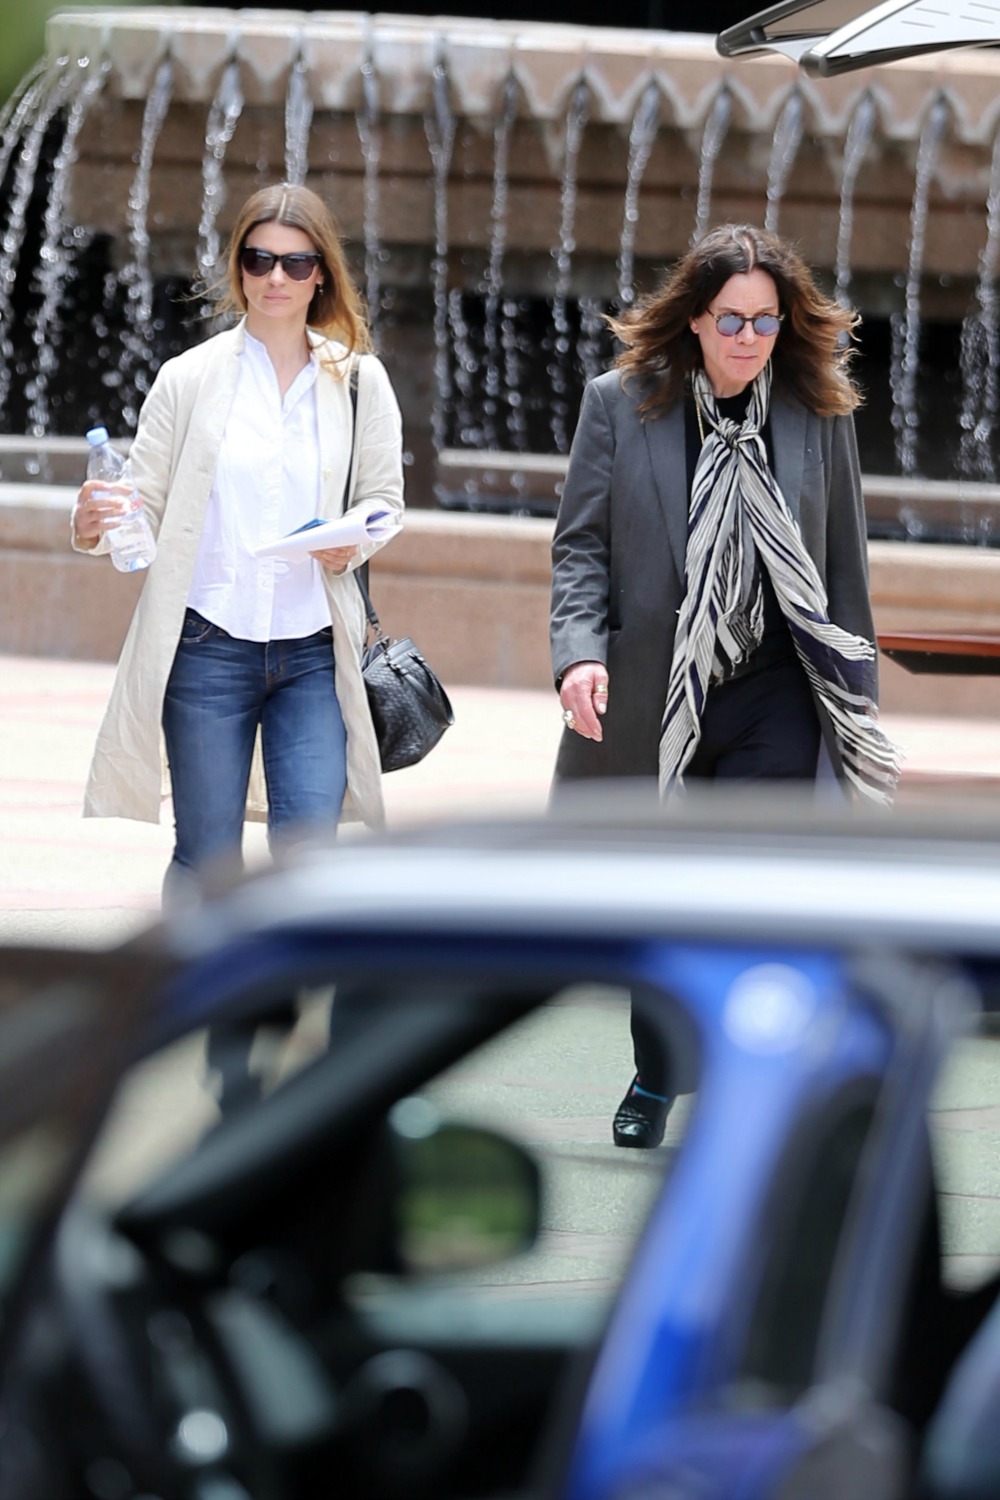 Ozzy Osbourne Steps Out With Rarely-Seen Daughter Aimee Osbourne After ...